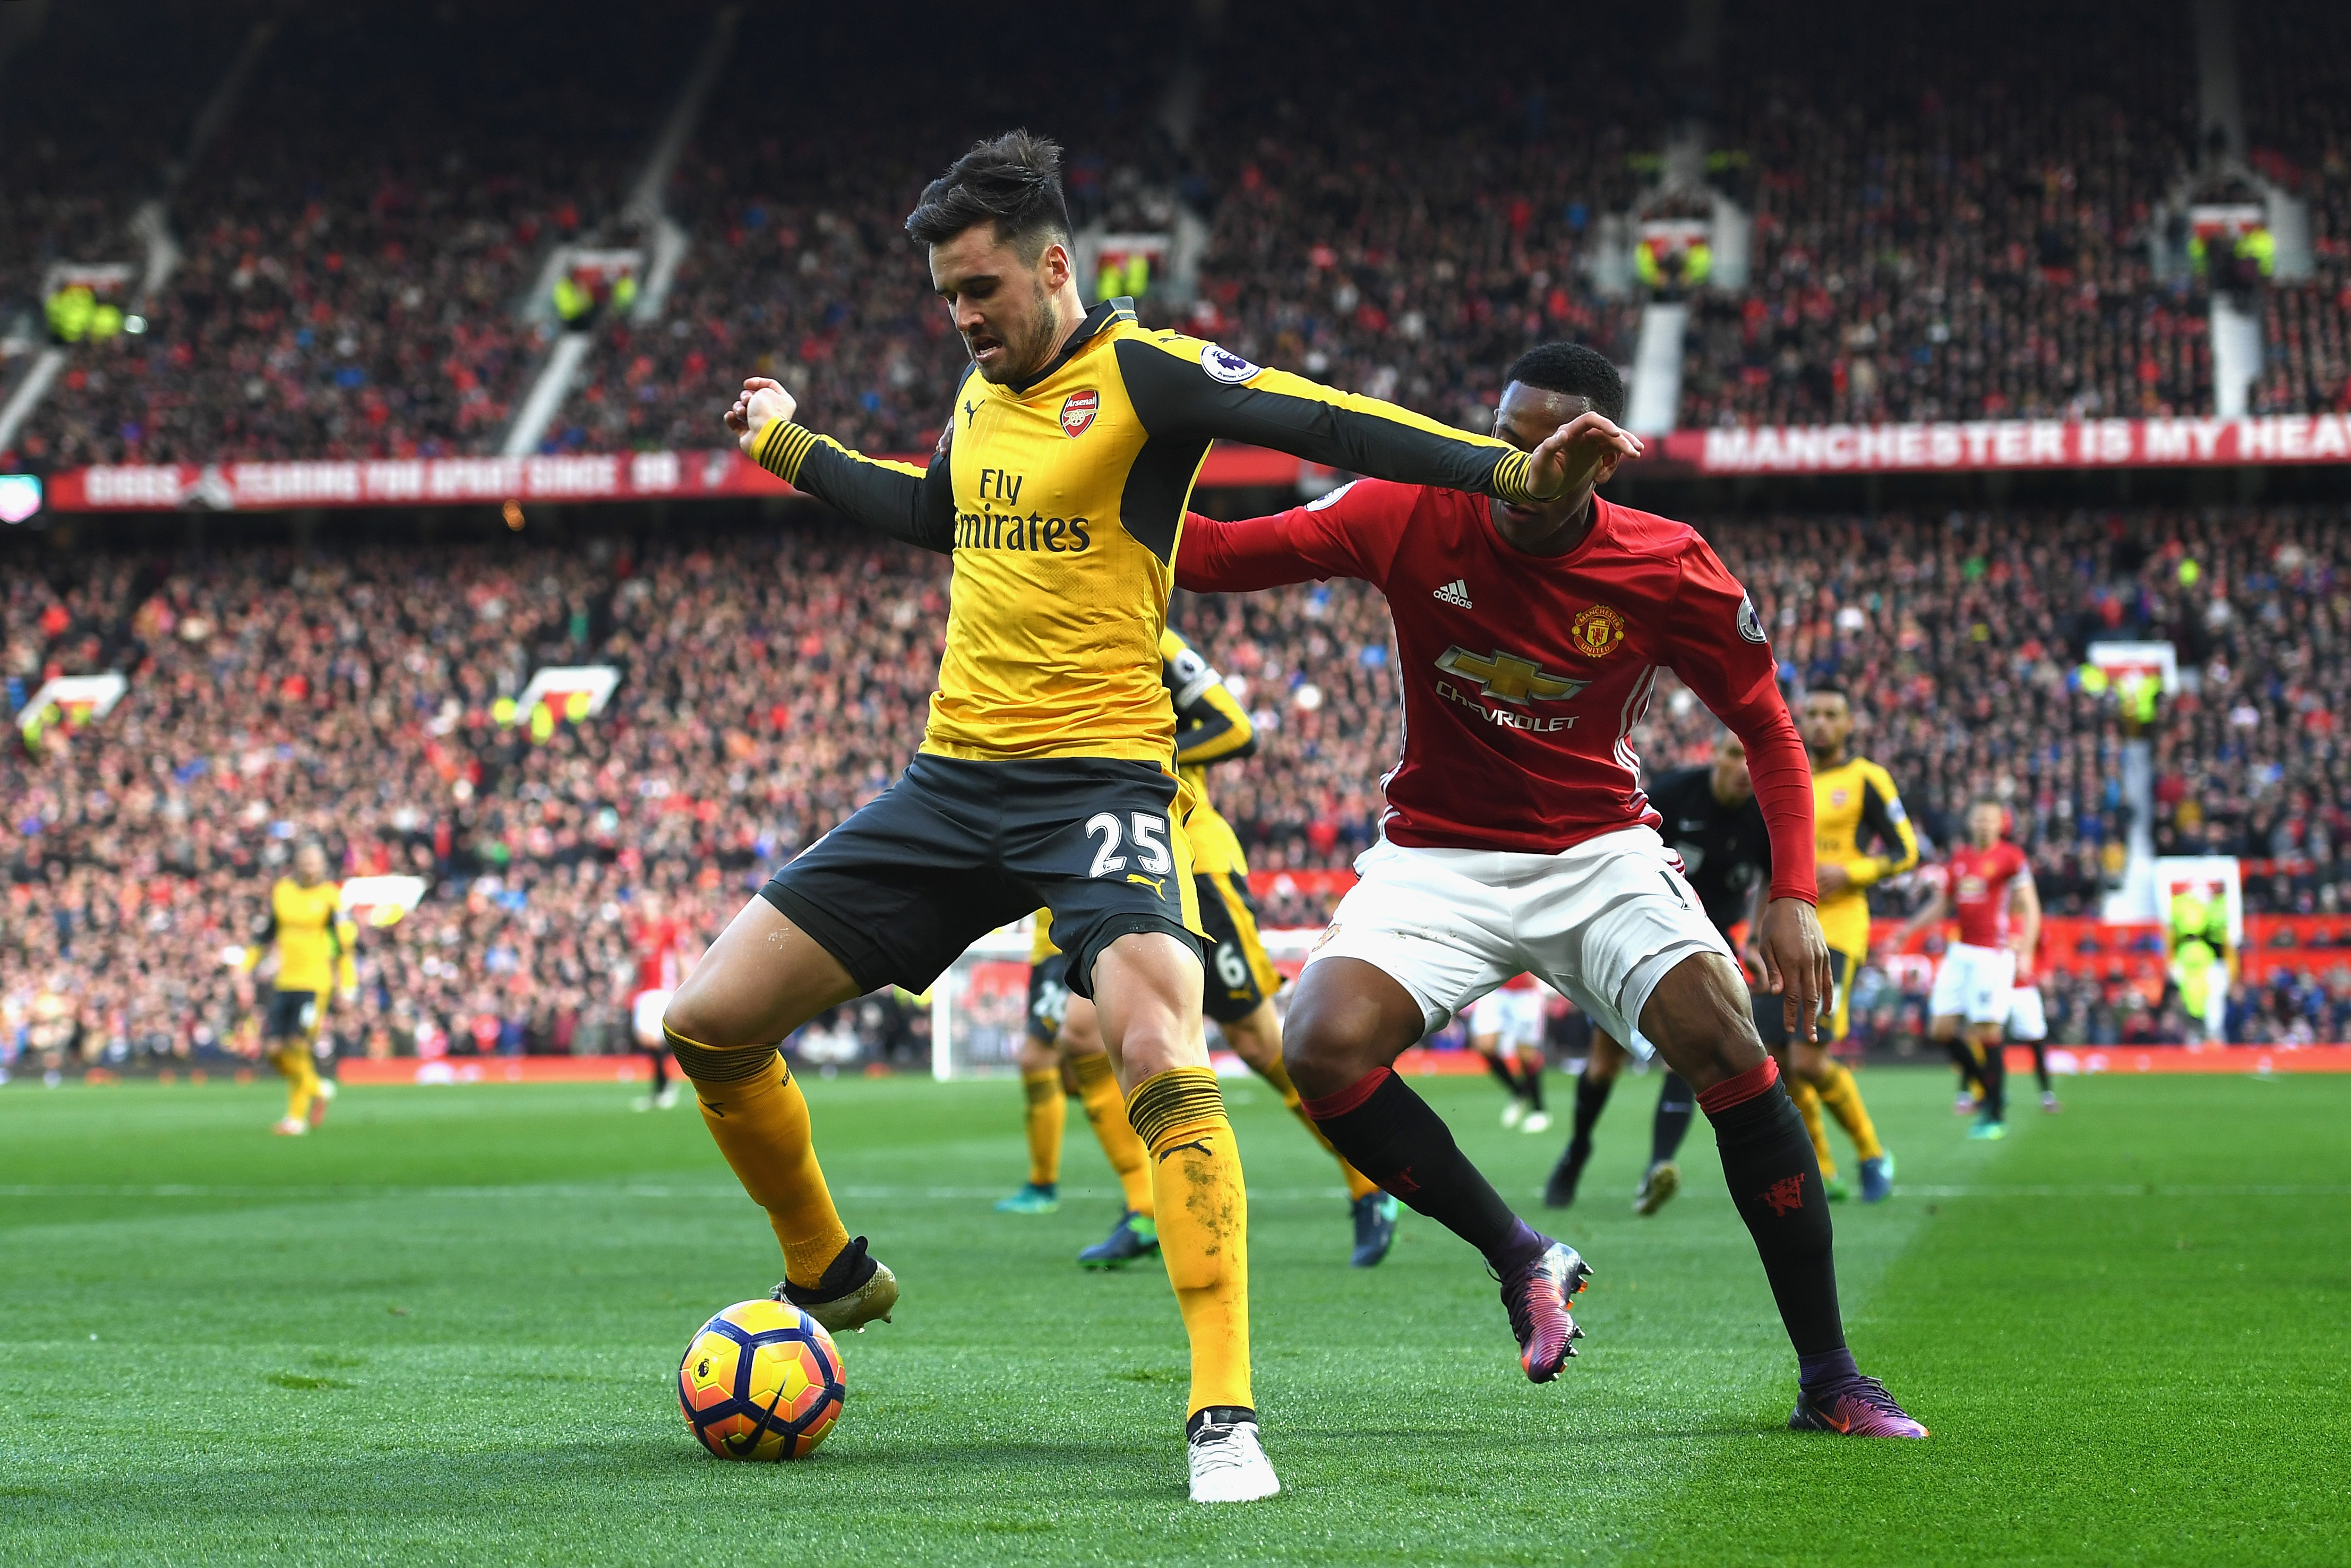 MANCHESTER, ENGLAND - NOVEMBER 19: Carl Jenkinson of Arsenal (L) is put under pressure from Anthony Martial of Manchester United (R) during the Premier League match between Manchester United and Arsenal at Old Trafford on November 19, 2016 in Manchester, England.  (Photo by Shaun Botterill/Getty Images)